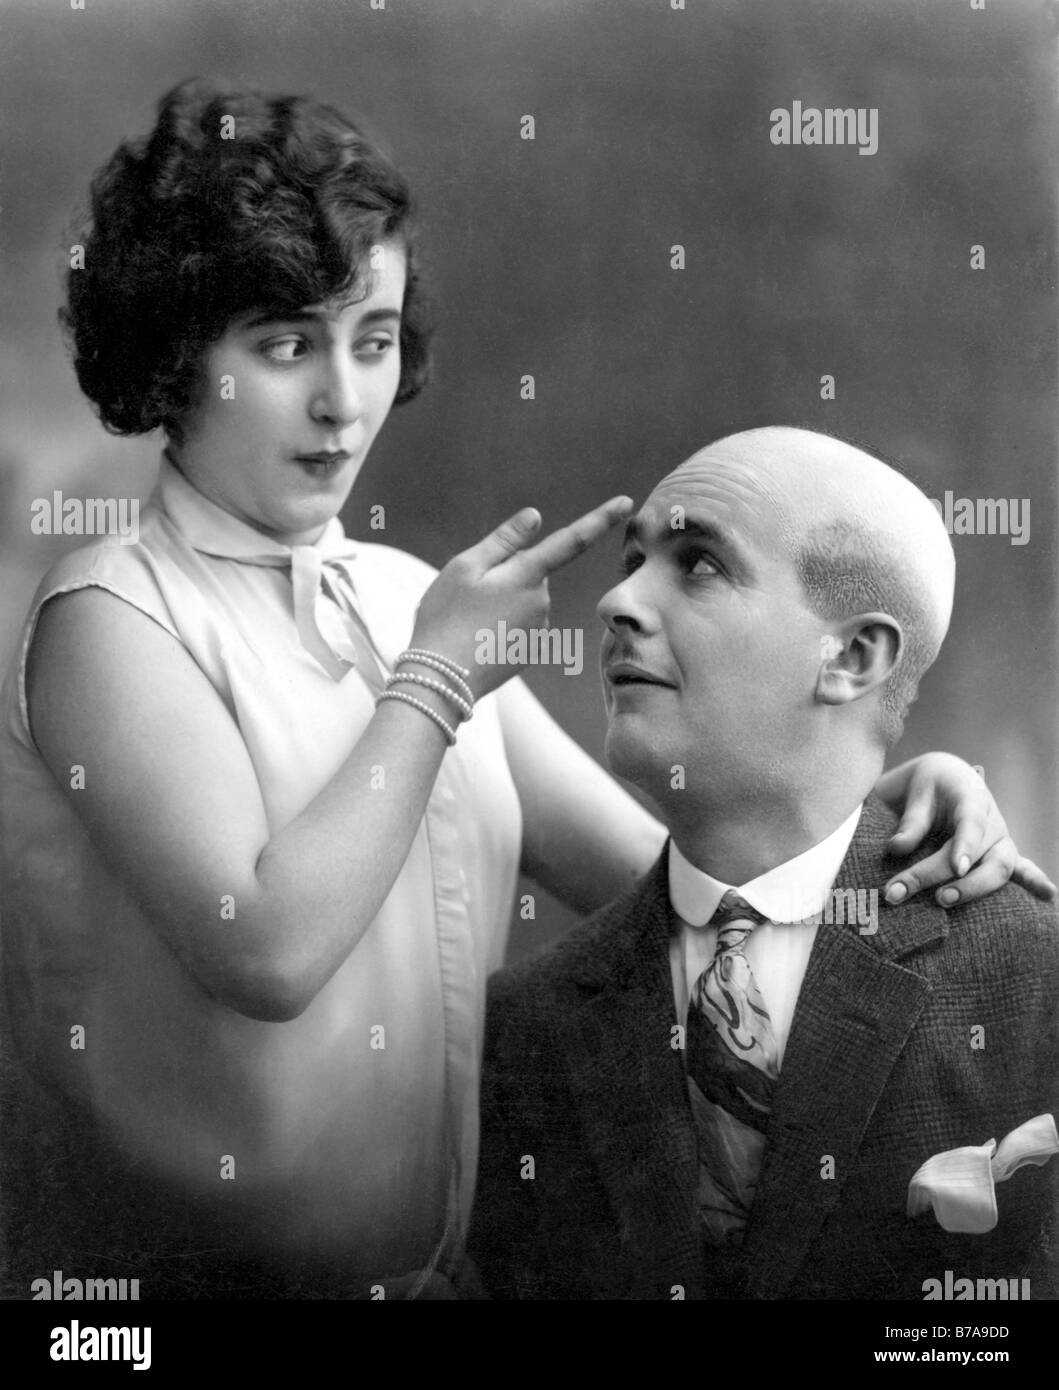 Historic photo, woman and bald man, Warum hat Egon keine Haare?, 'Why doesn't Egon have any hair?' ca. 1920 Stock Photo